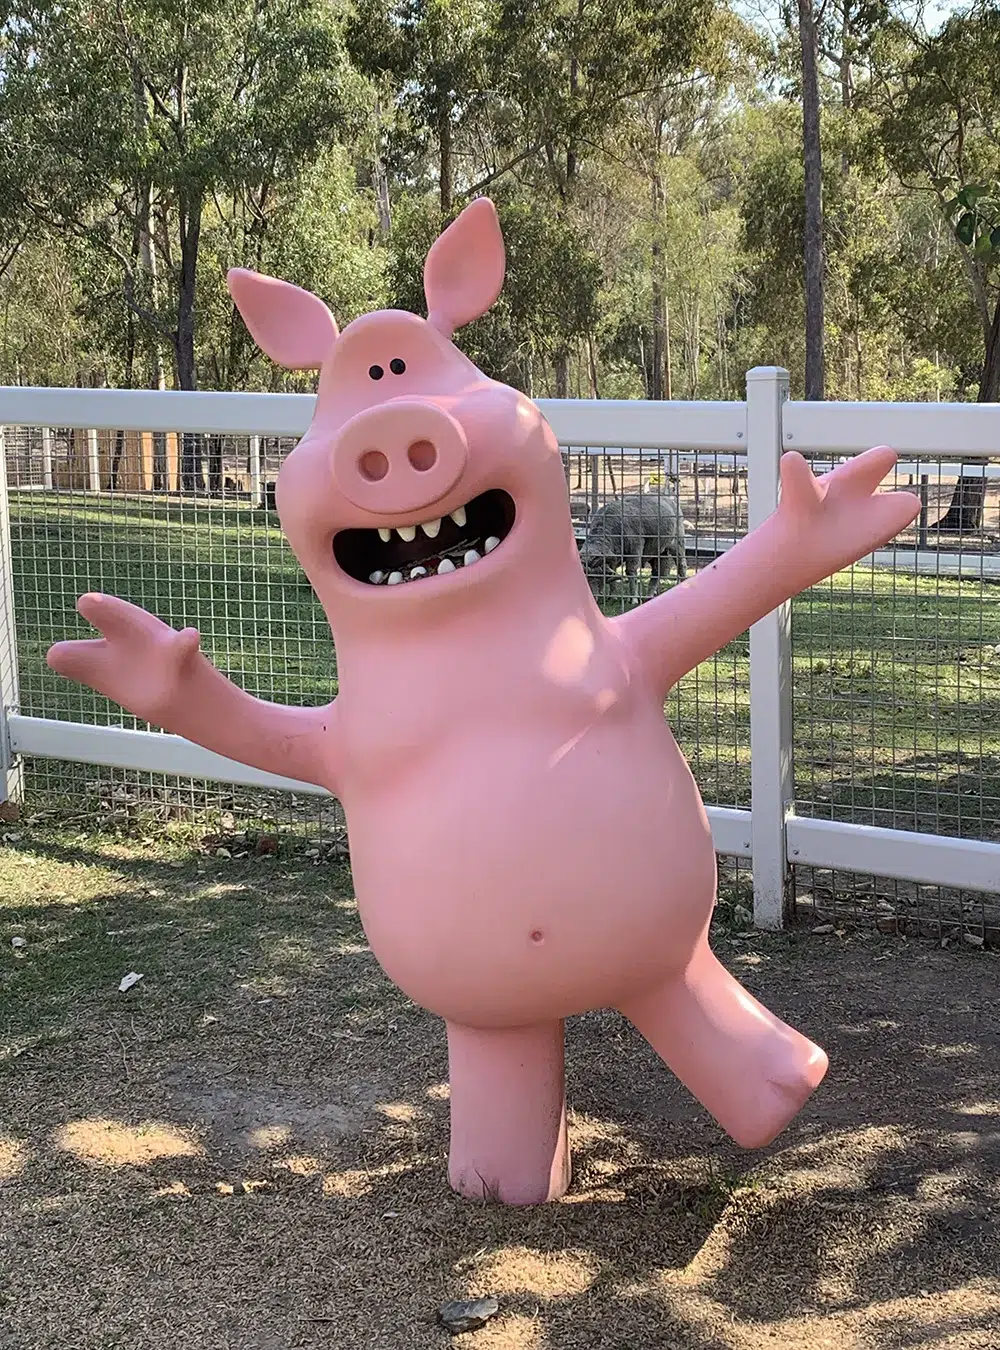 Large, cheerful sculpture of a pink pig with arms outstretched, located in a park-like setting.